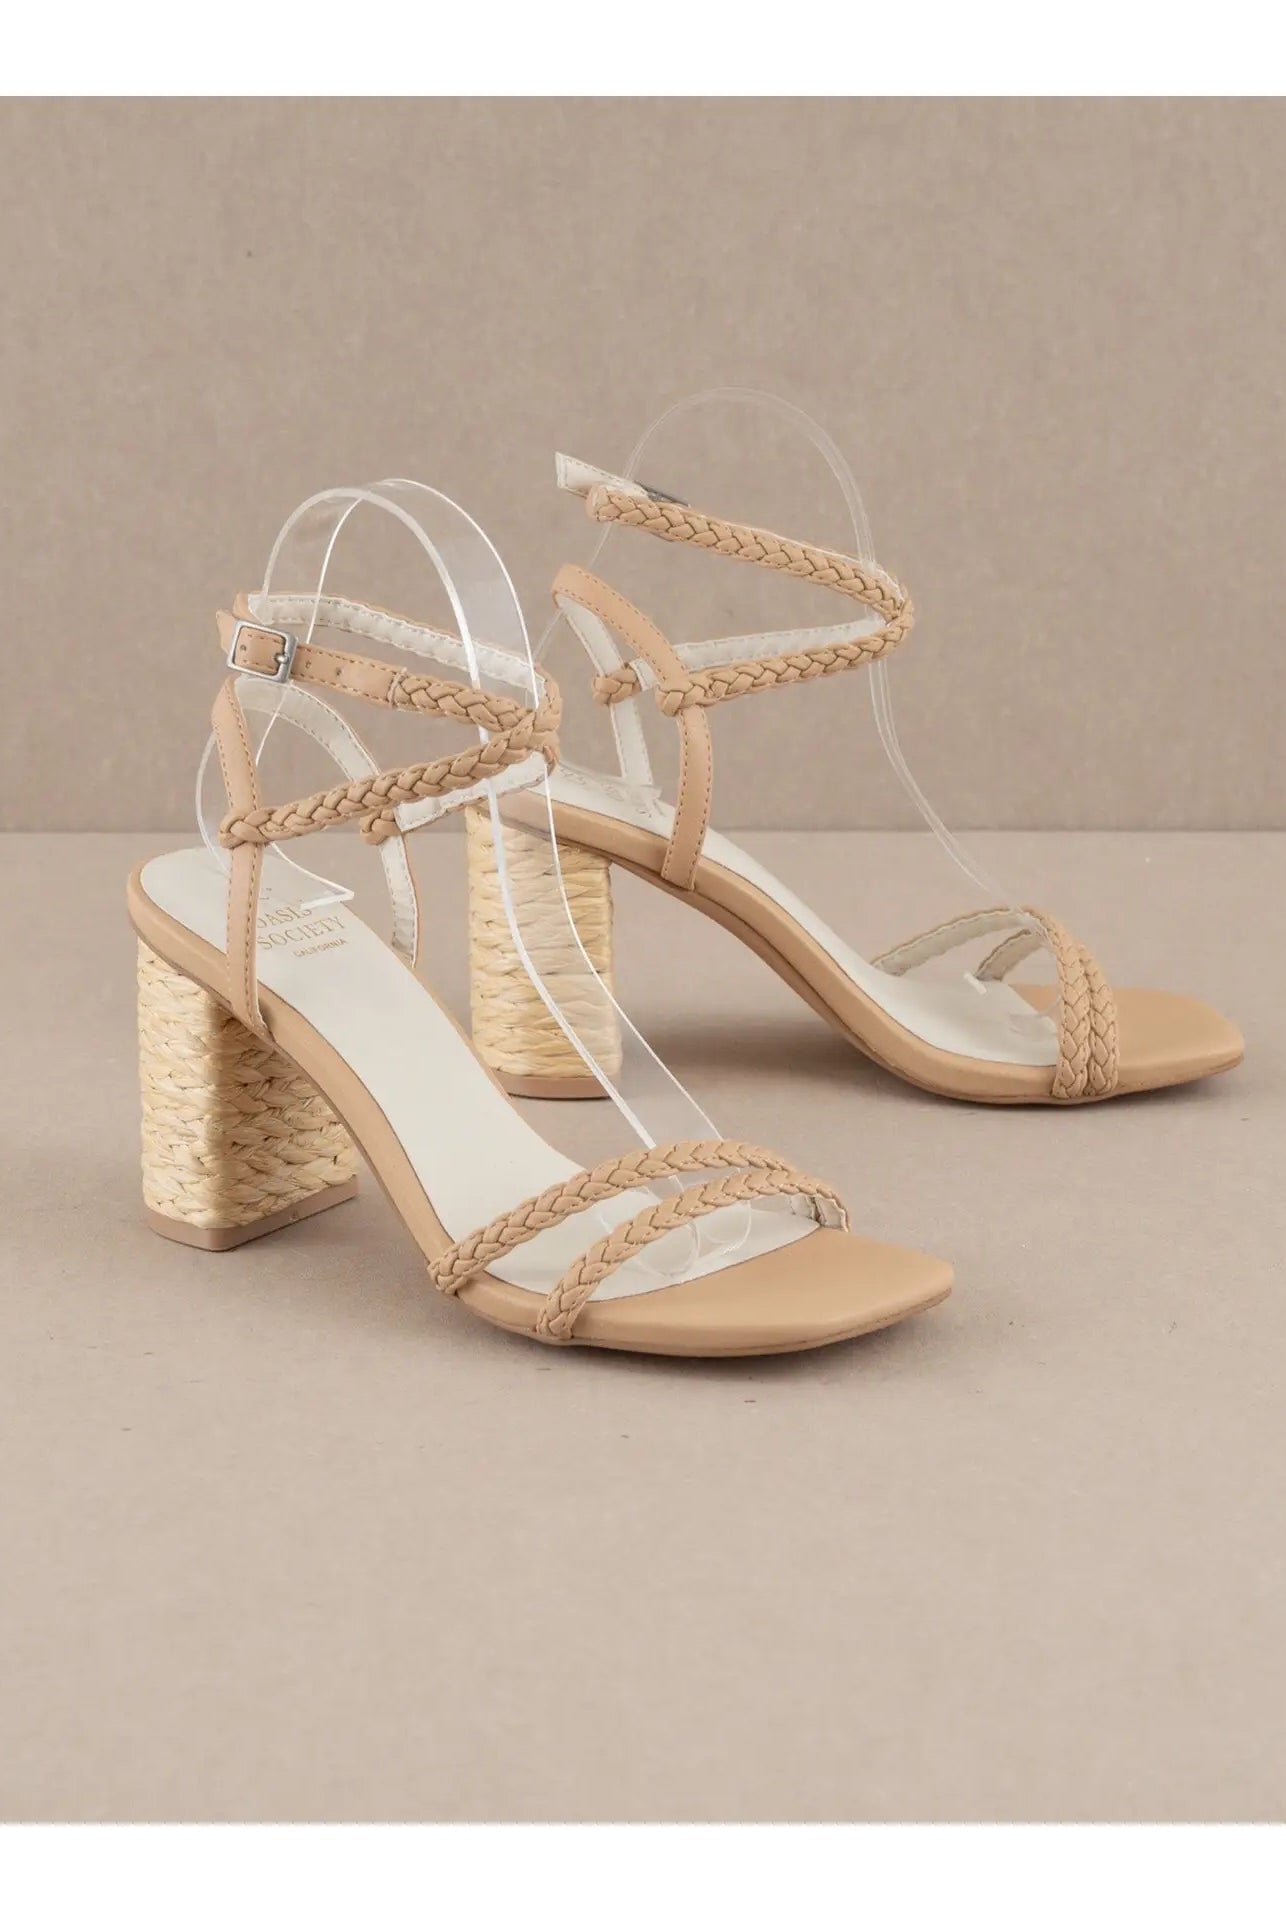 Naturally Neutral Sandal-Sandals-The Lovely Closet-The Lovely Closet, Women's Fashion Boutique in Alexandria, KY